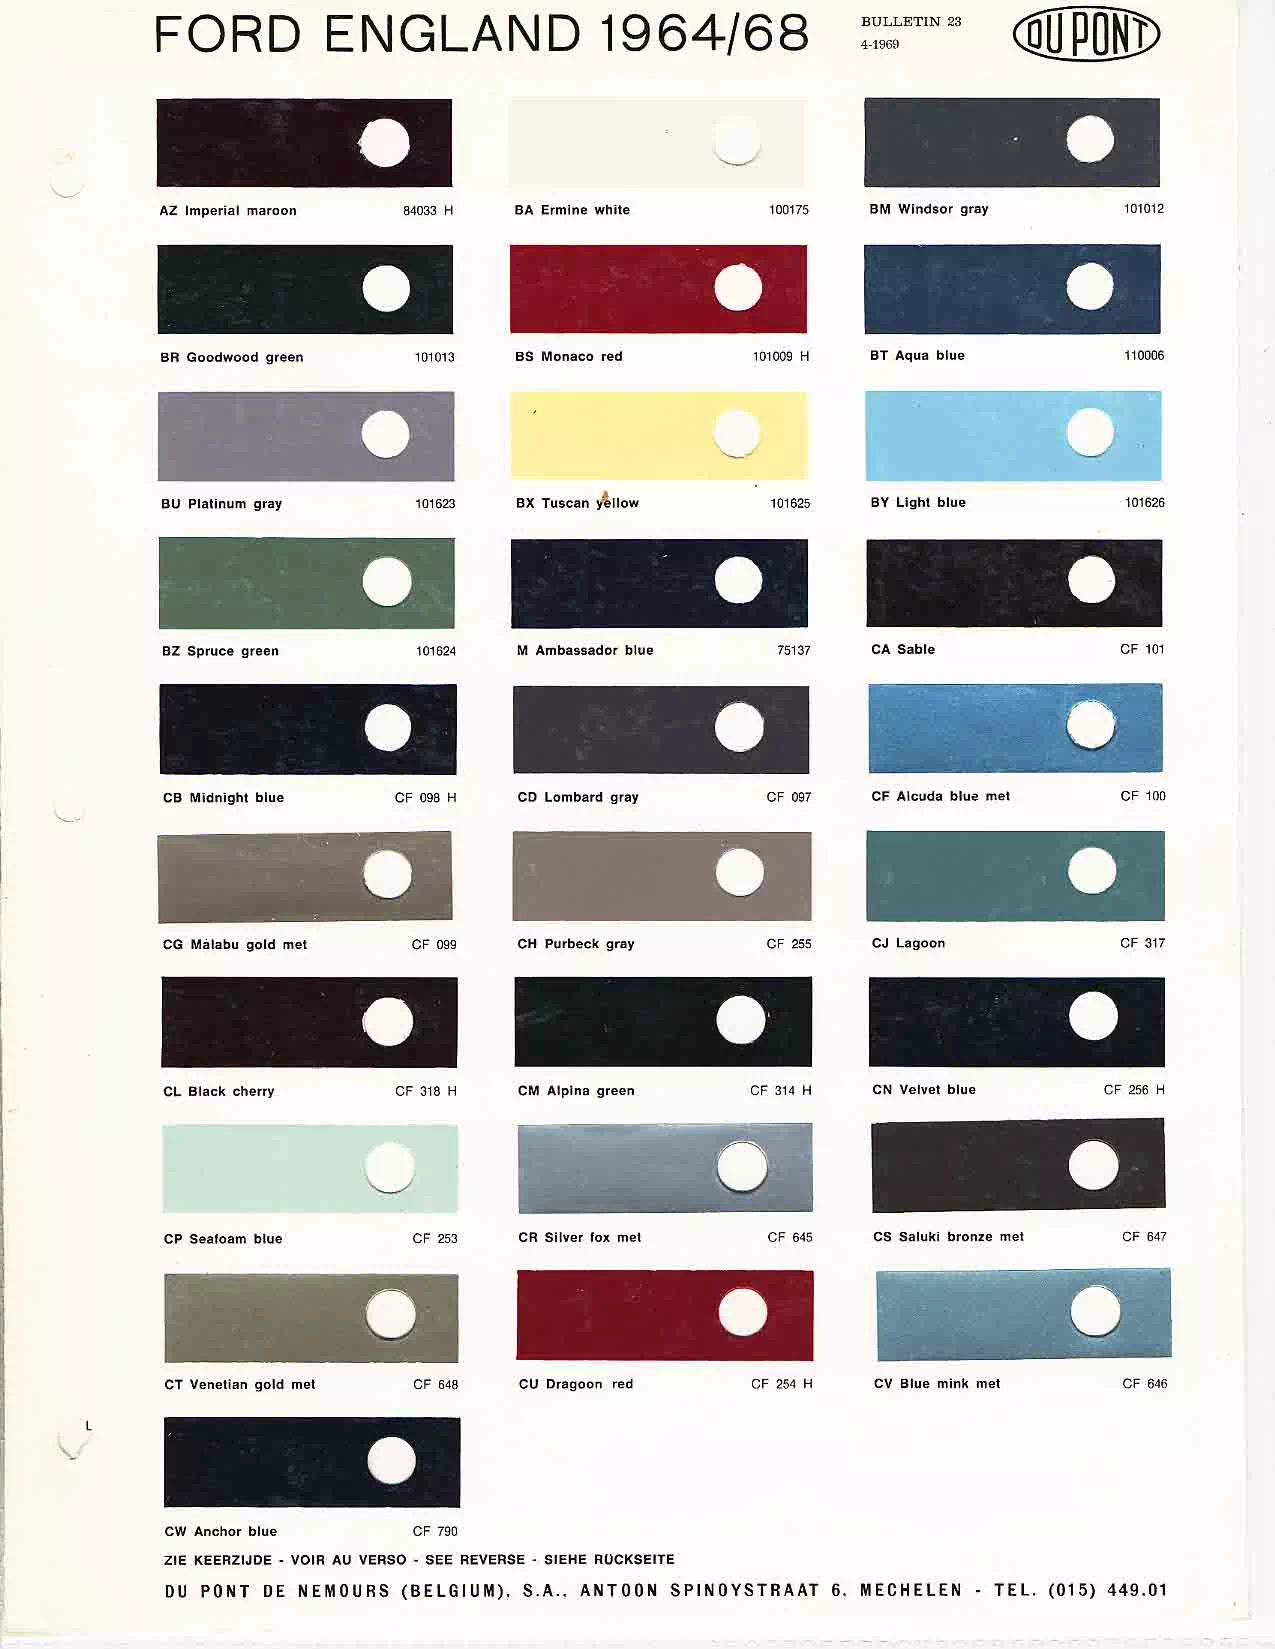 Color examples, Ordering Codes, OEM Paint Code, Color Swatches, and Color Names for the Ford Motor Company in 1964